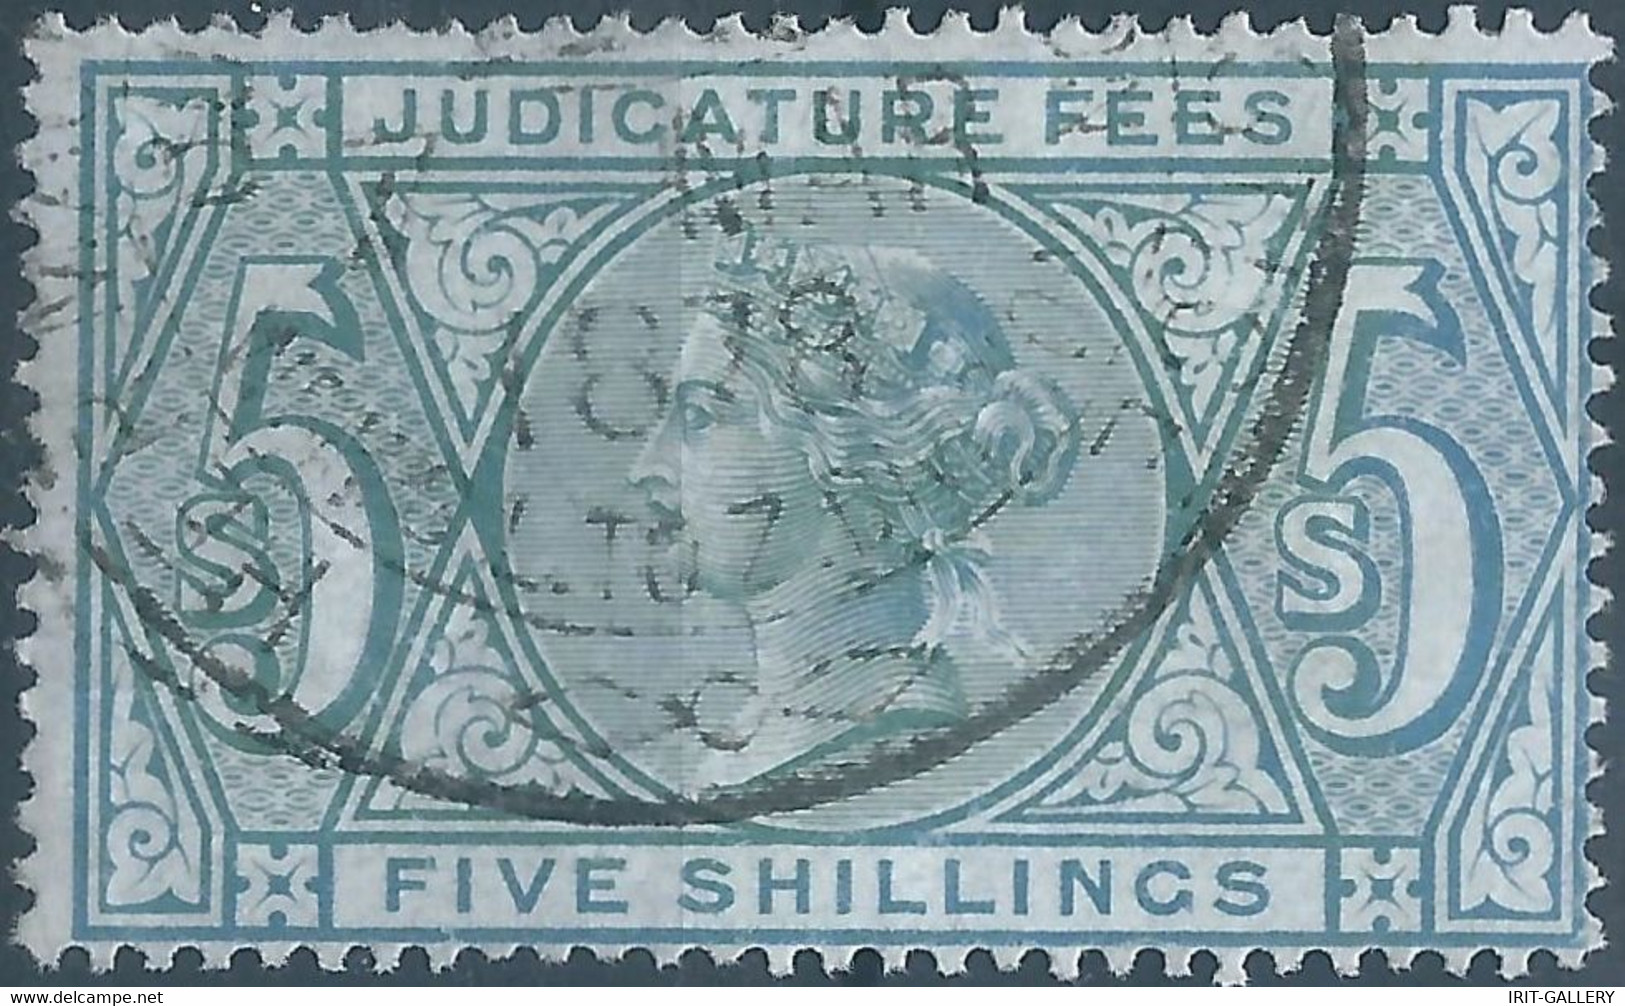 Great Britain-ENGLAND,Queen Victoria,1880-1900 Revenue Stamp Tax Fiscal,JUDICATURE FEES, 5 Shillings,Used - Fiscale Zegels